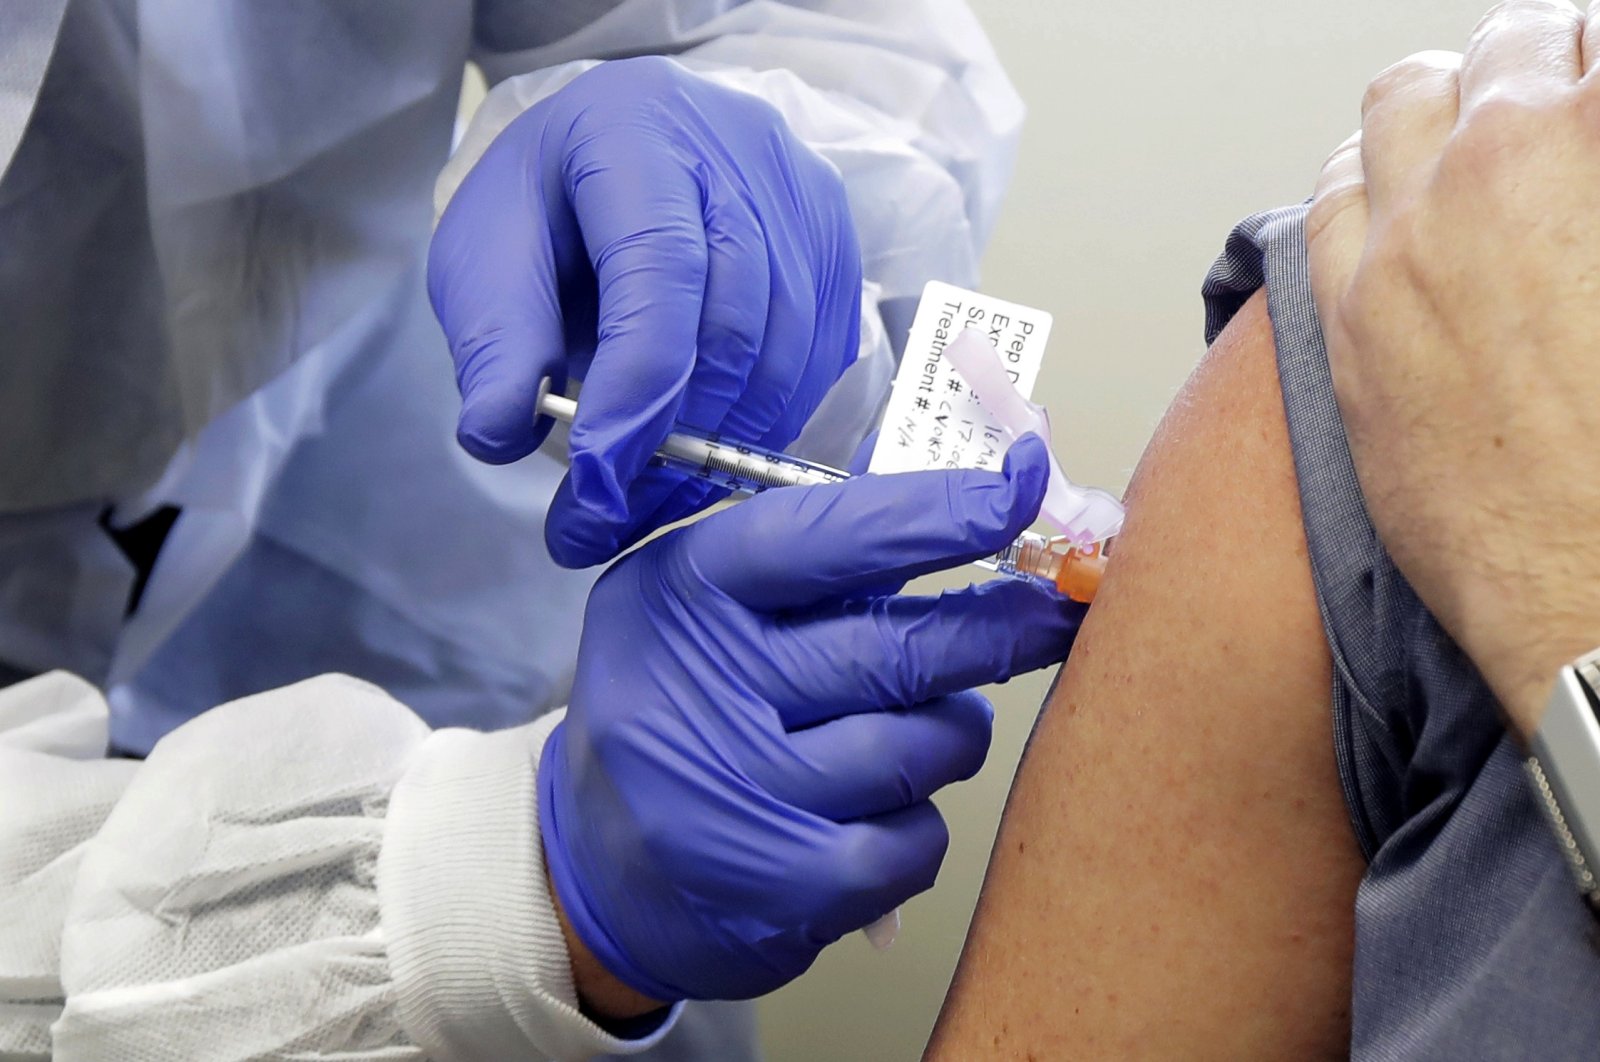 A volunteer receives a shot in the first-stage safety study of Moderna's potential vaccine for COVID-19 at the Kaiser Permanente Washington Health Research Institute in Seattle, Washington, March 16, 2020. (AP Photo)